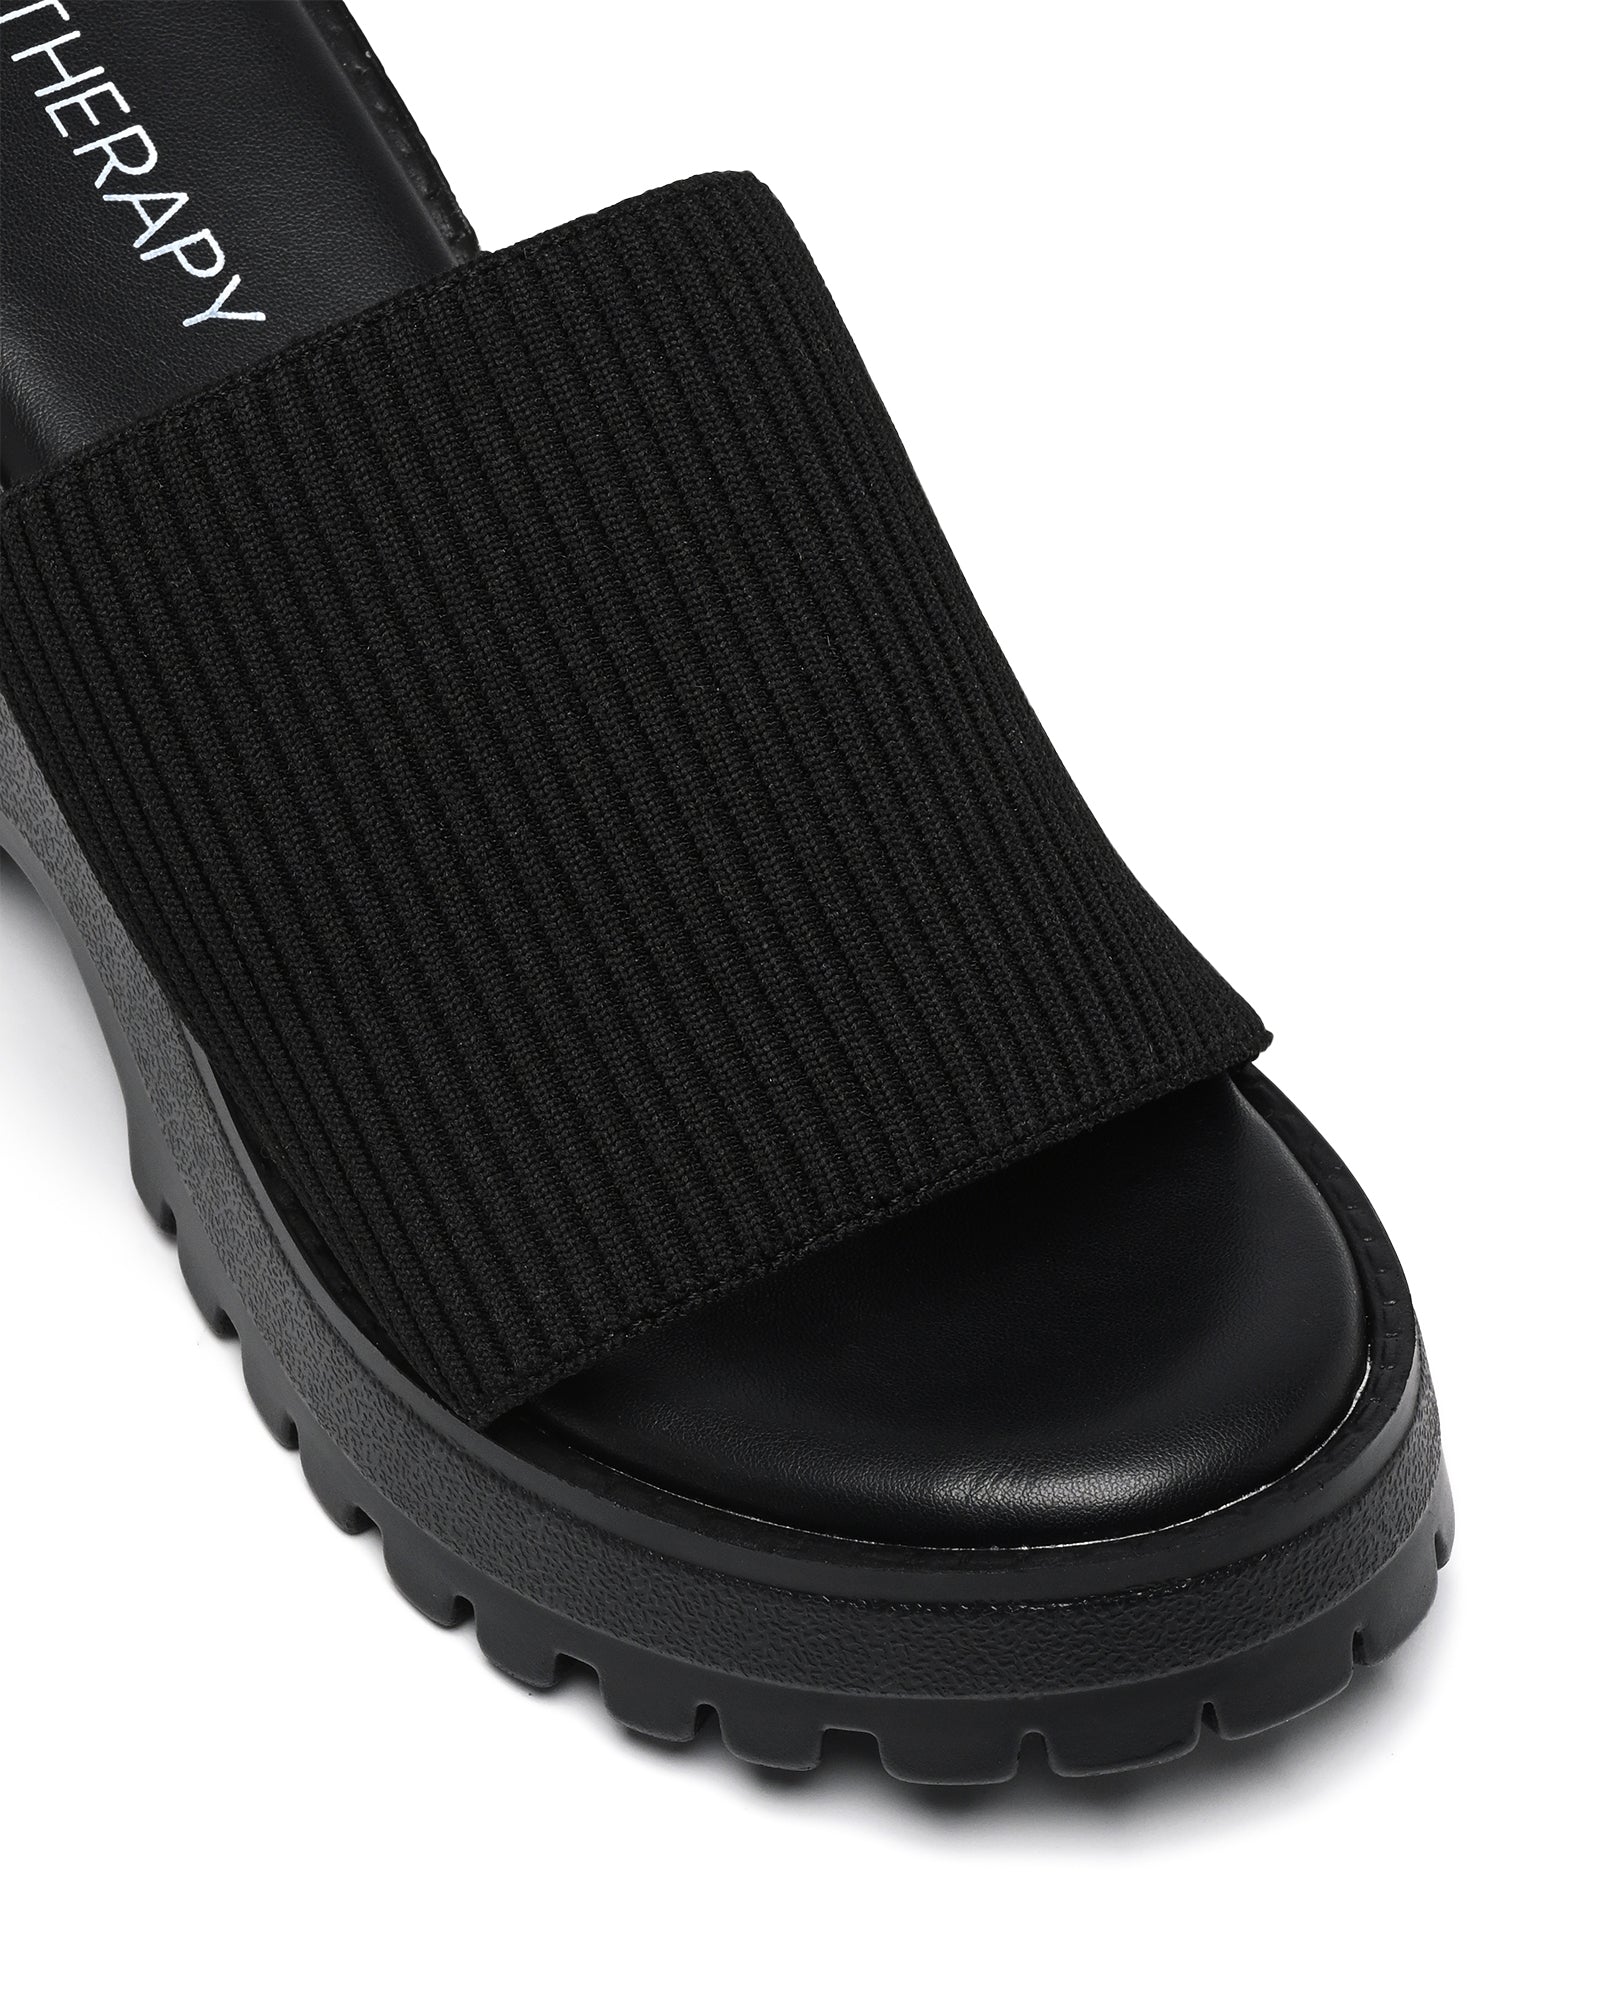 Therapy Shoes Romy Black Knit | Women's Sandals | Platform | Knit